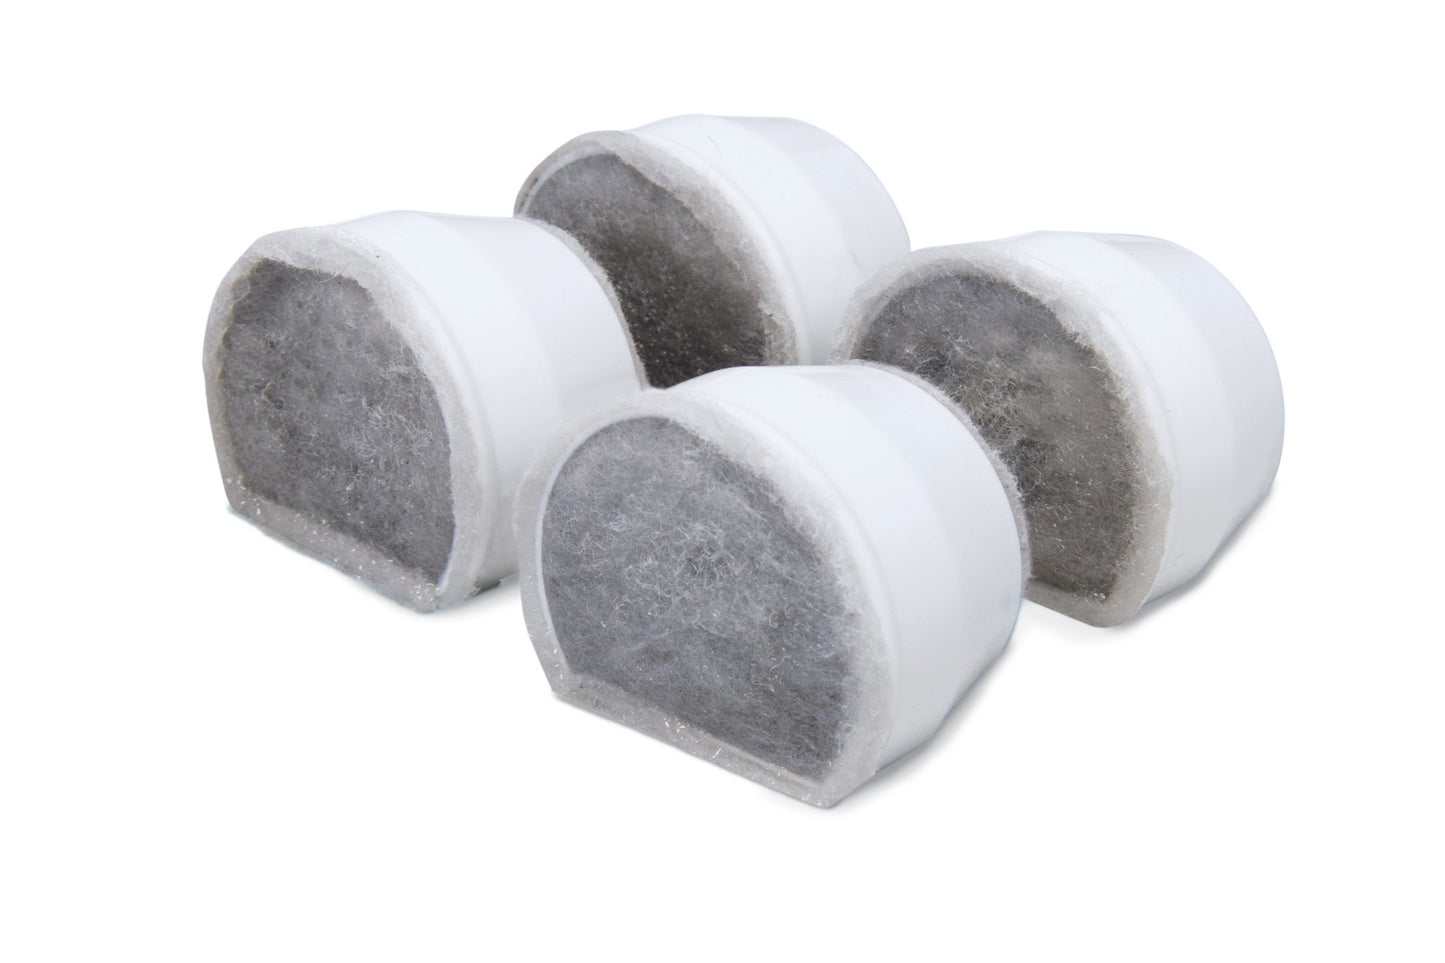 Petsafe Drinkwell Replacement Charcoal Filter 4 Pack - Woonona Petfood & Produce